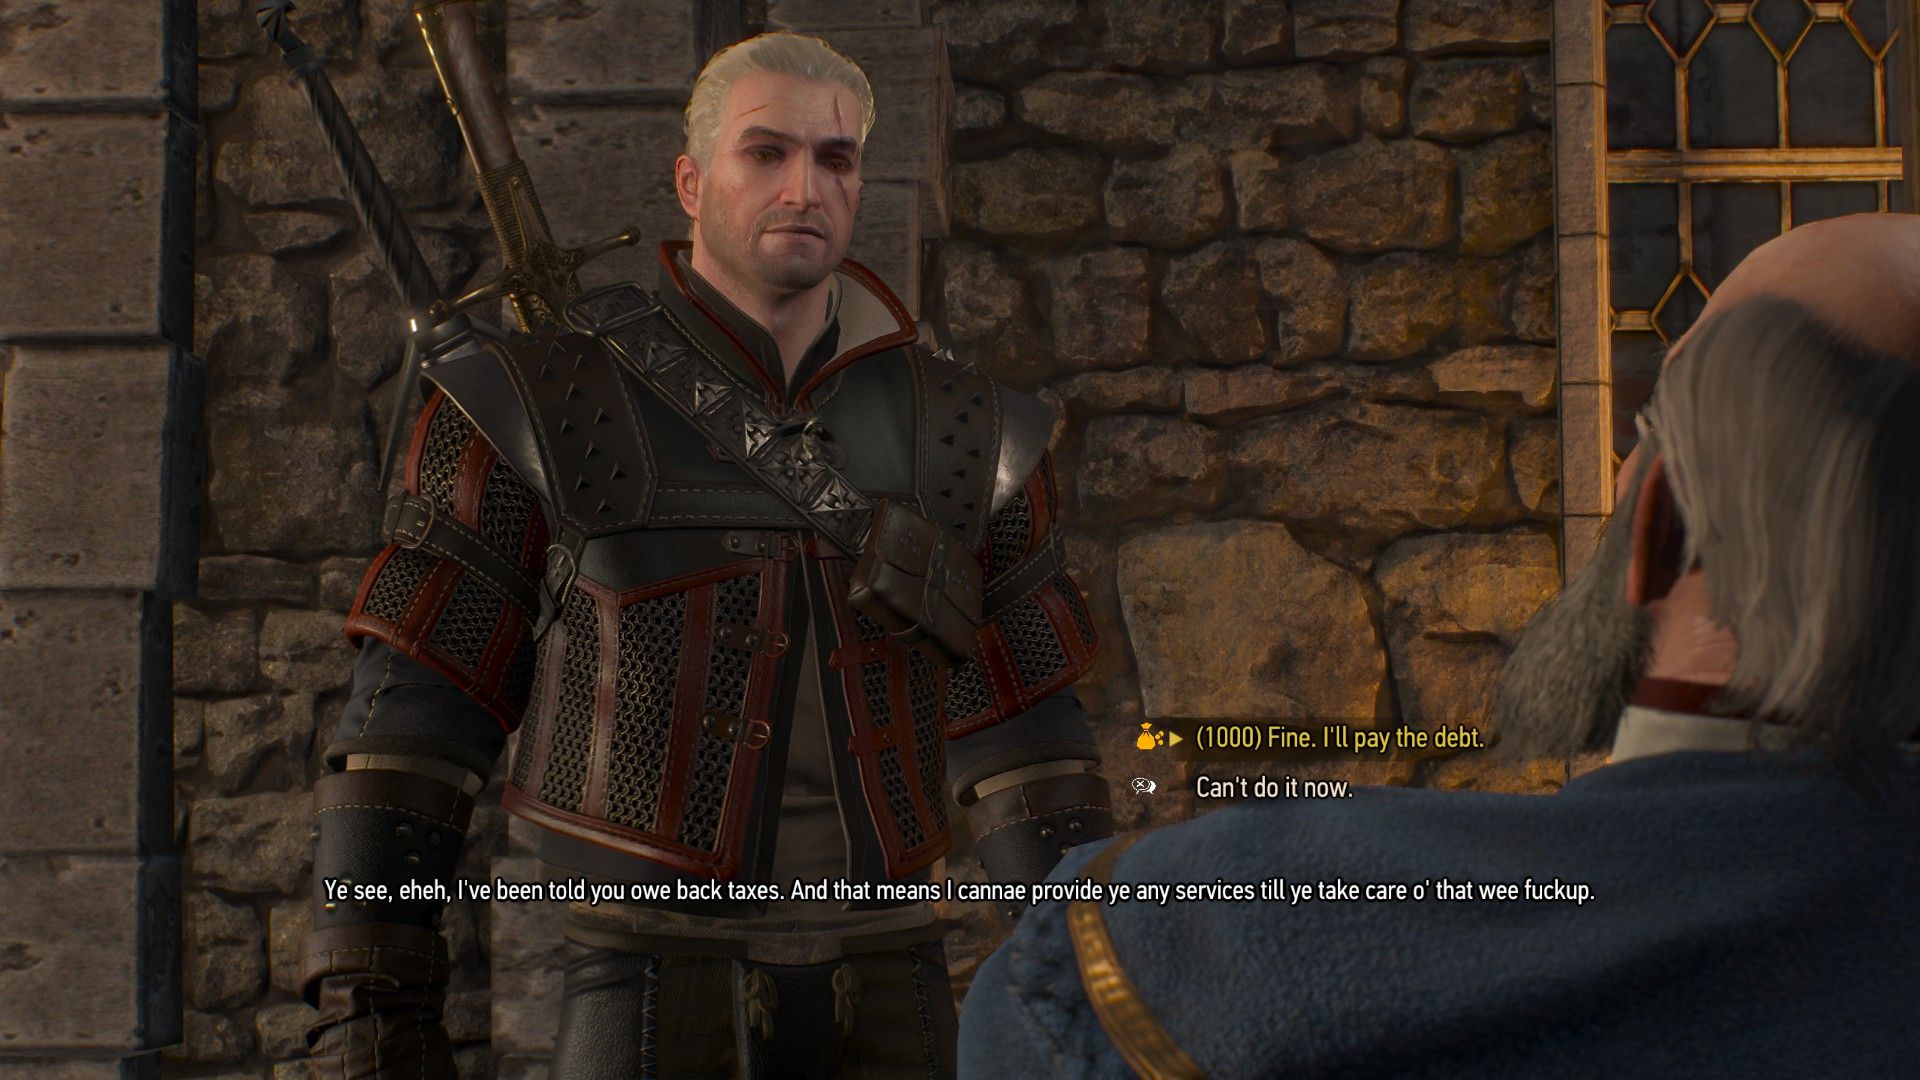 Screenshot of The Witcher 3 dialogue menu with Geralt paying taxes option selected.